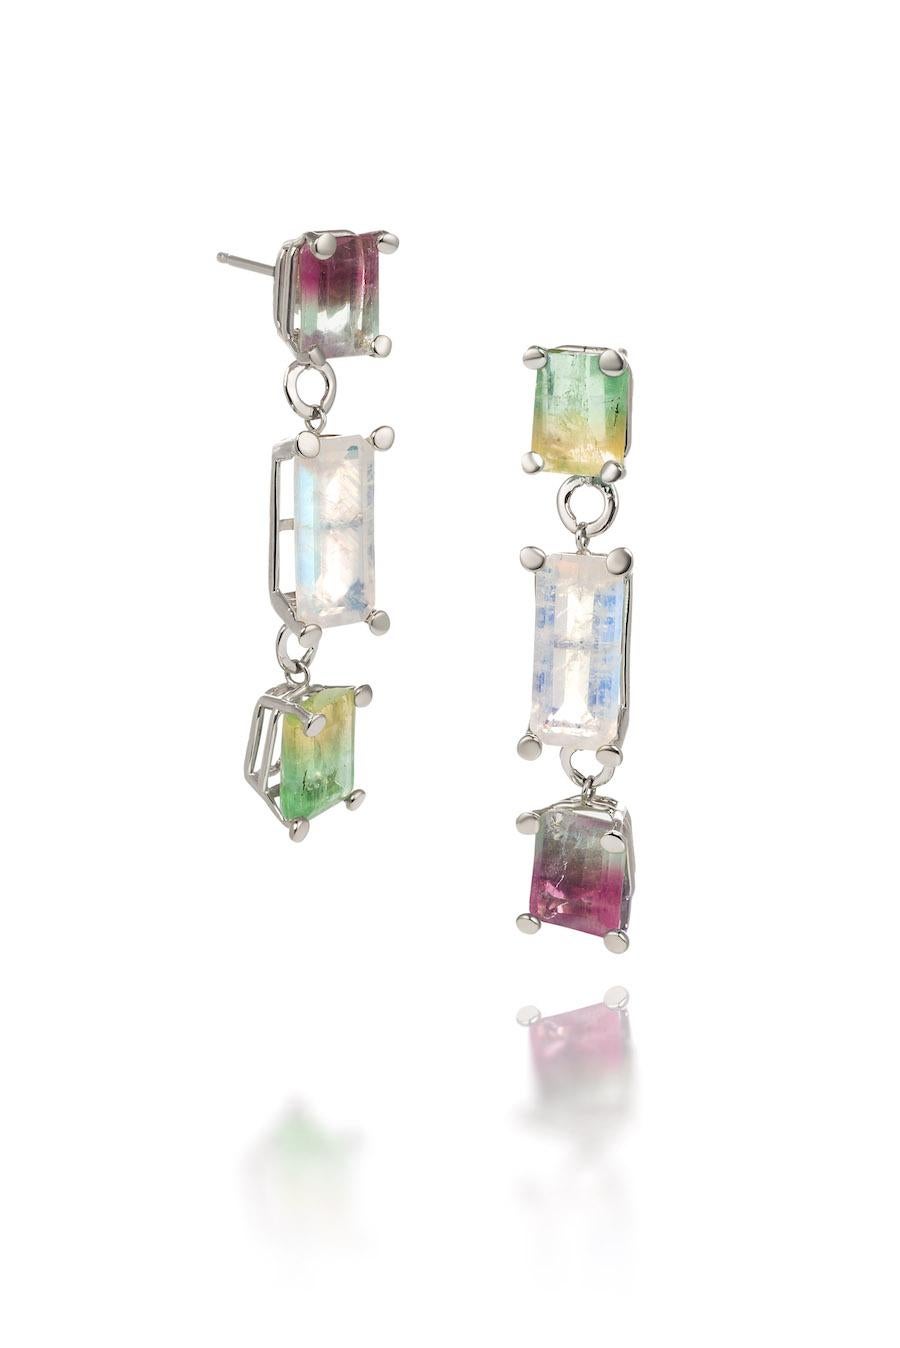 10K White gold Tutti Fruity colored Fluorites and Moonstone earrings are 